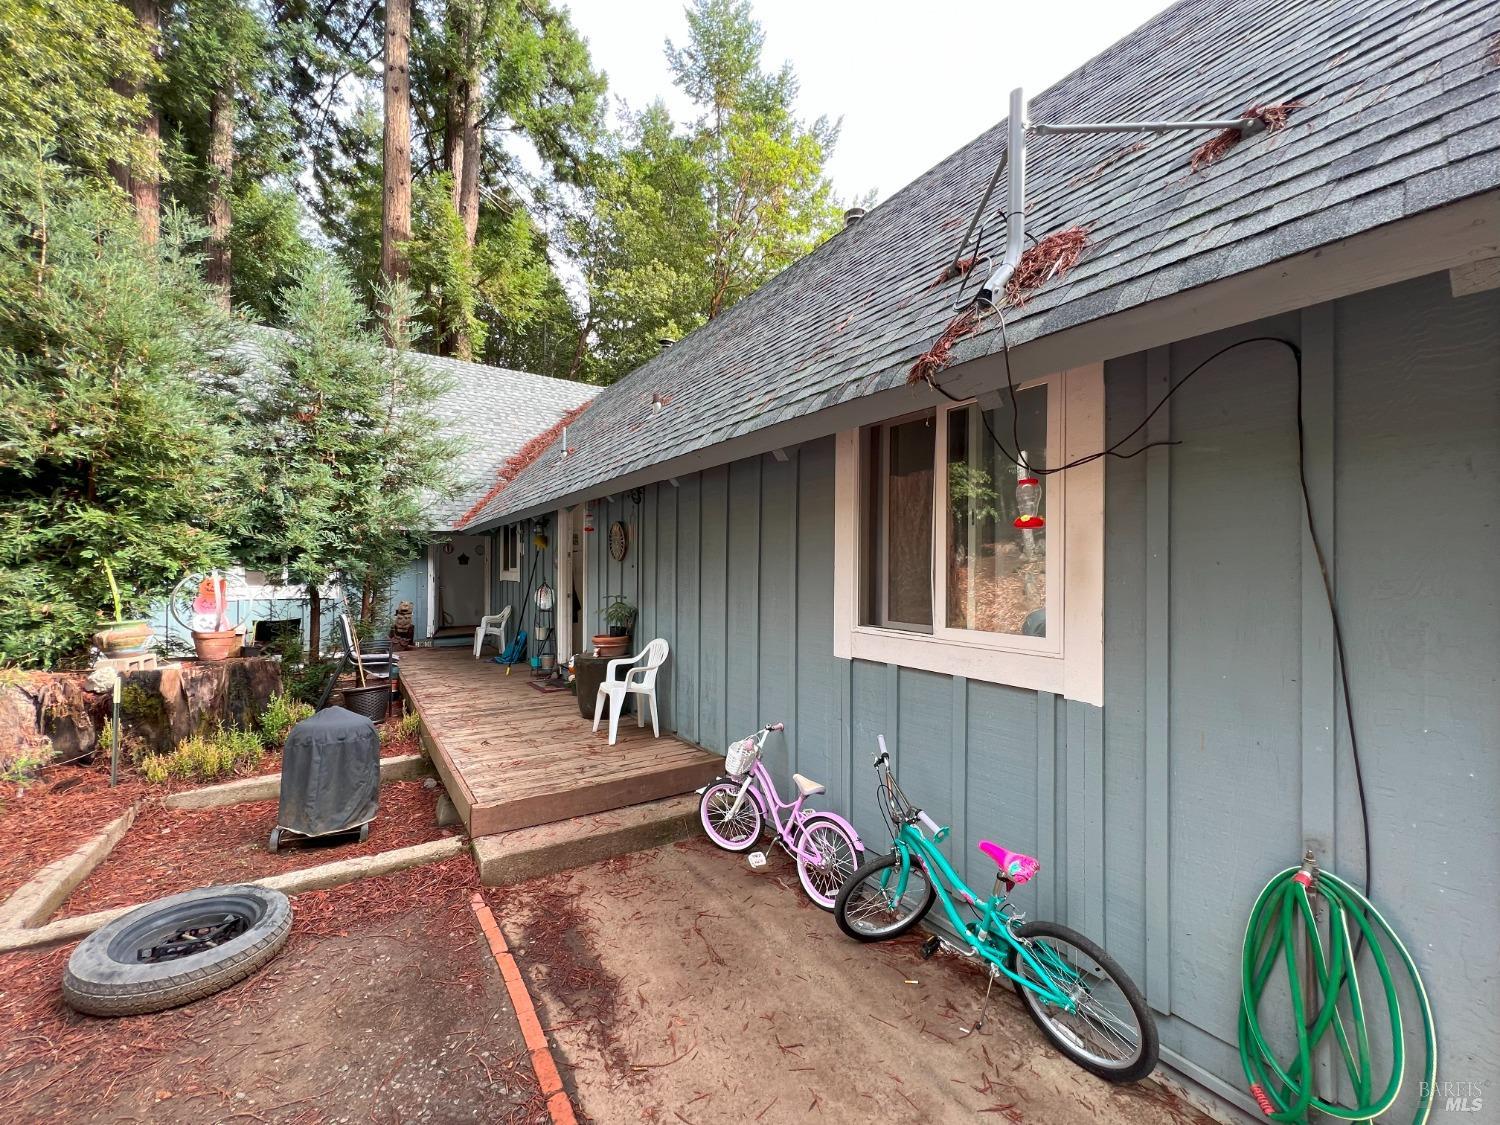 Photo of 26025 Otter Dr in Willits, CA